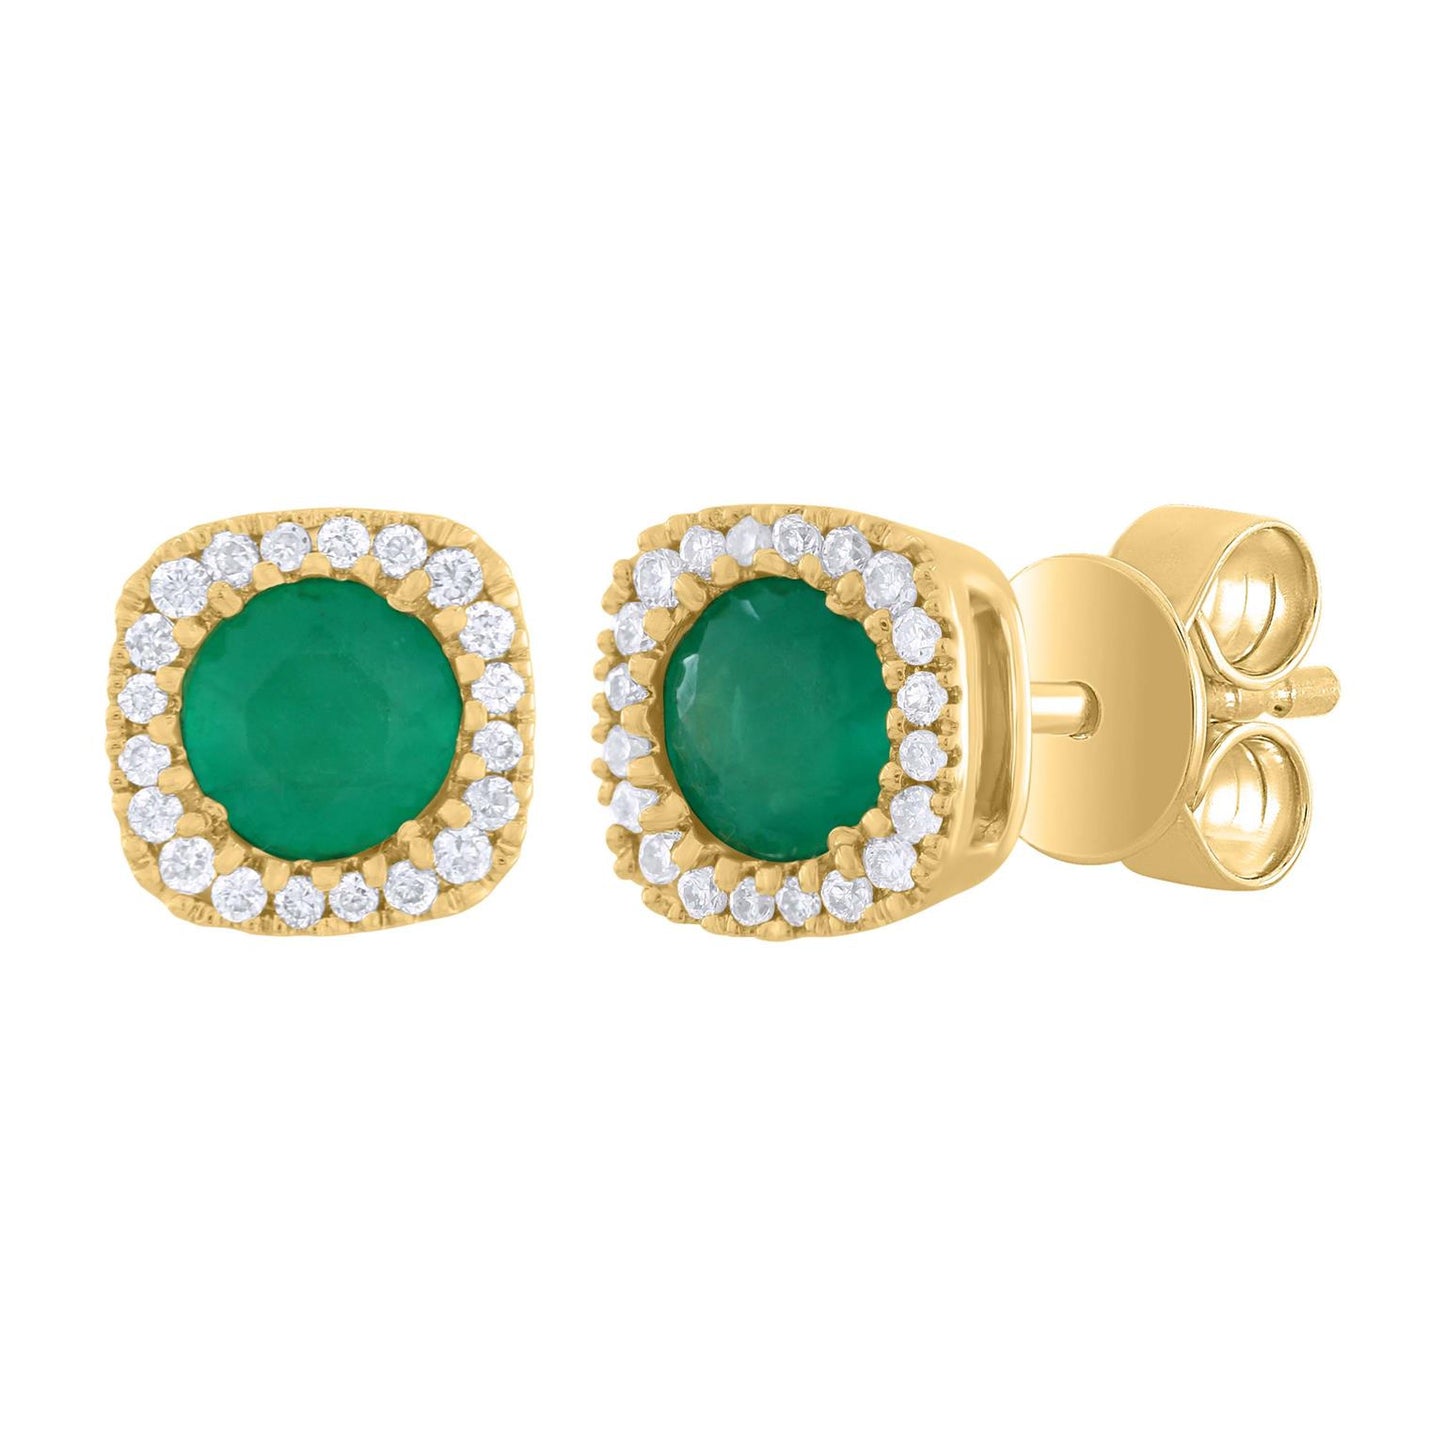 14K Gold Color Stone with Diamond Stud Earring